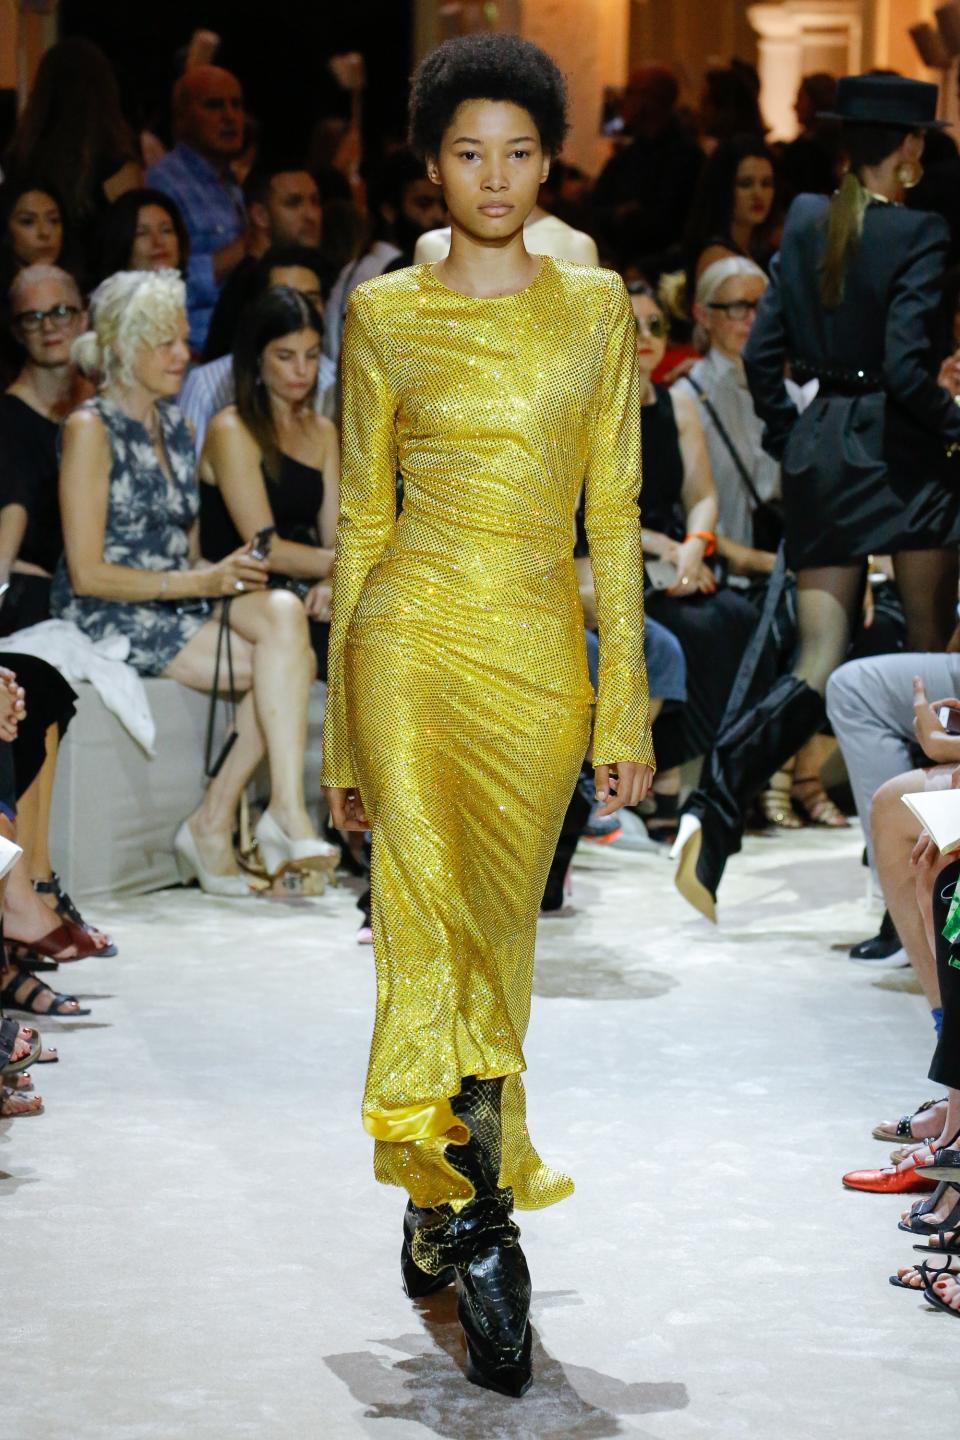 Will Hollywood embrace theatrical gowns from Matty Bovan or Marc Jacobs? Only time will tell.